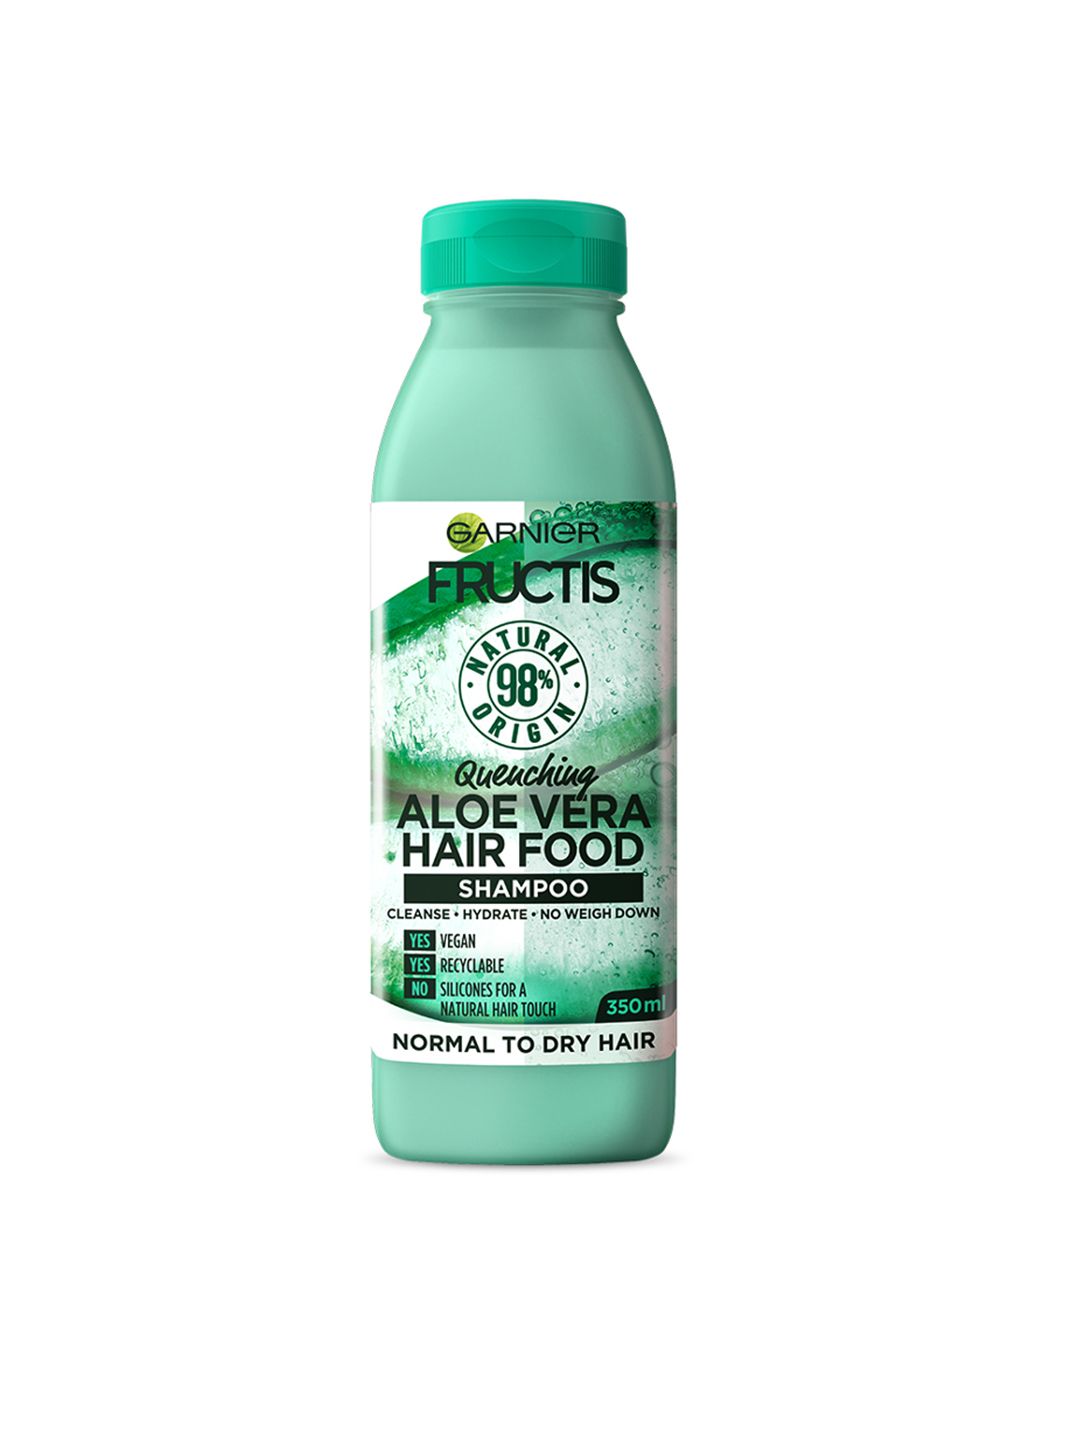 Garnier Fructis Hair Food - Quenching Aloe Vera Shampoo For Normal to Dry Hair 350ml Price in India